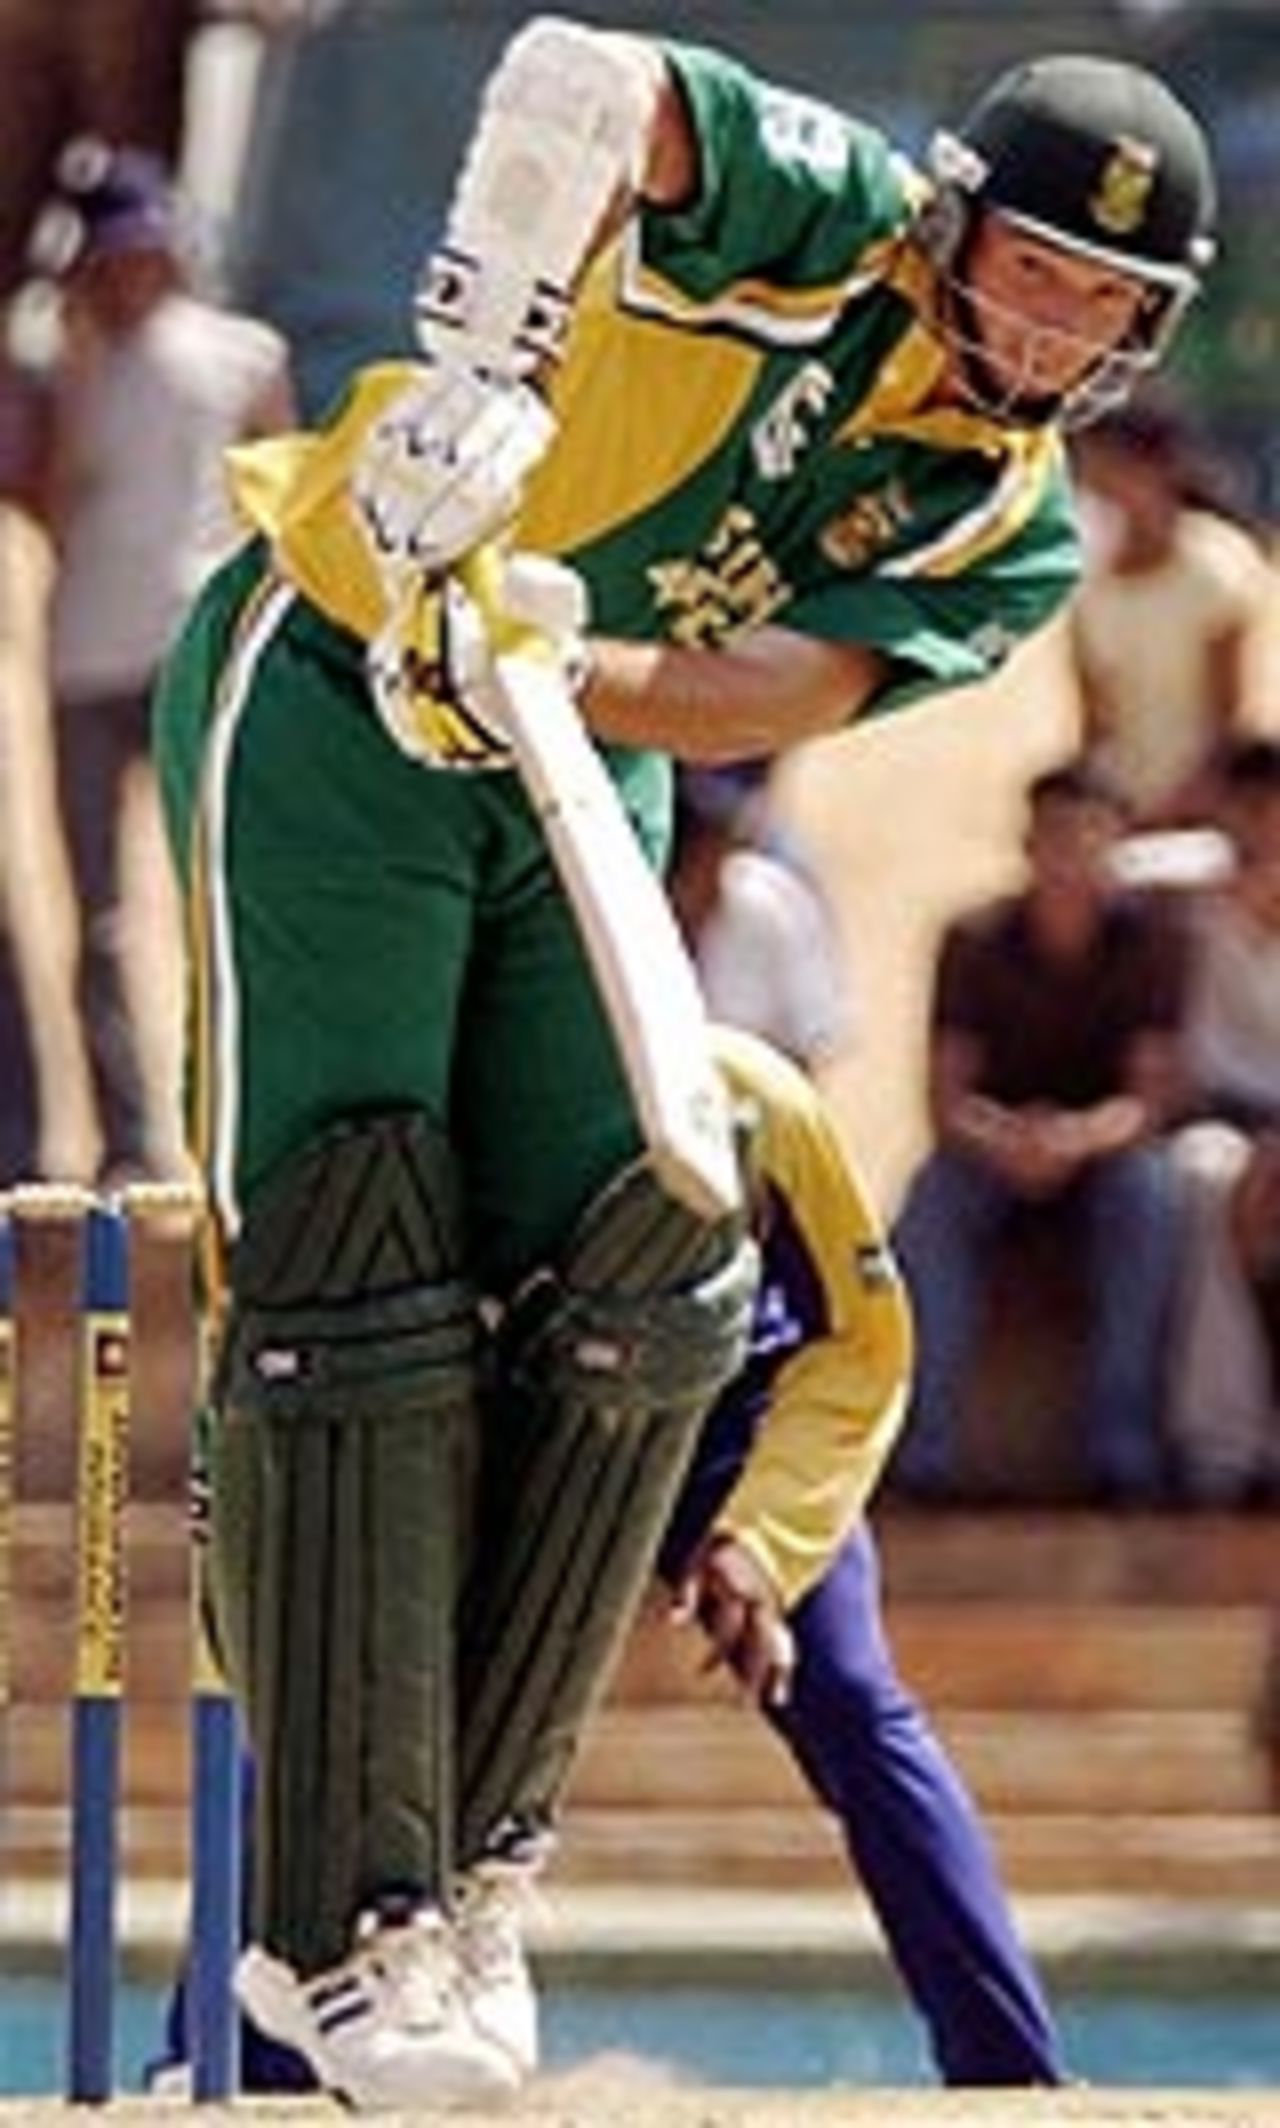 Graeme Smith played well for his 46, but could not carry on from there, Sri Lanka v South Africa, 4th ODI, Dambulla, August 28, 2004